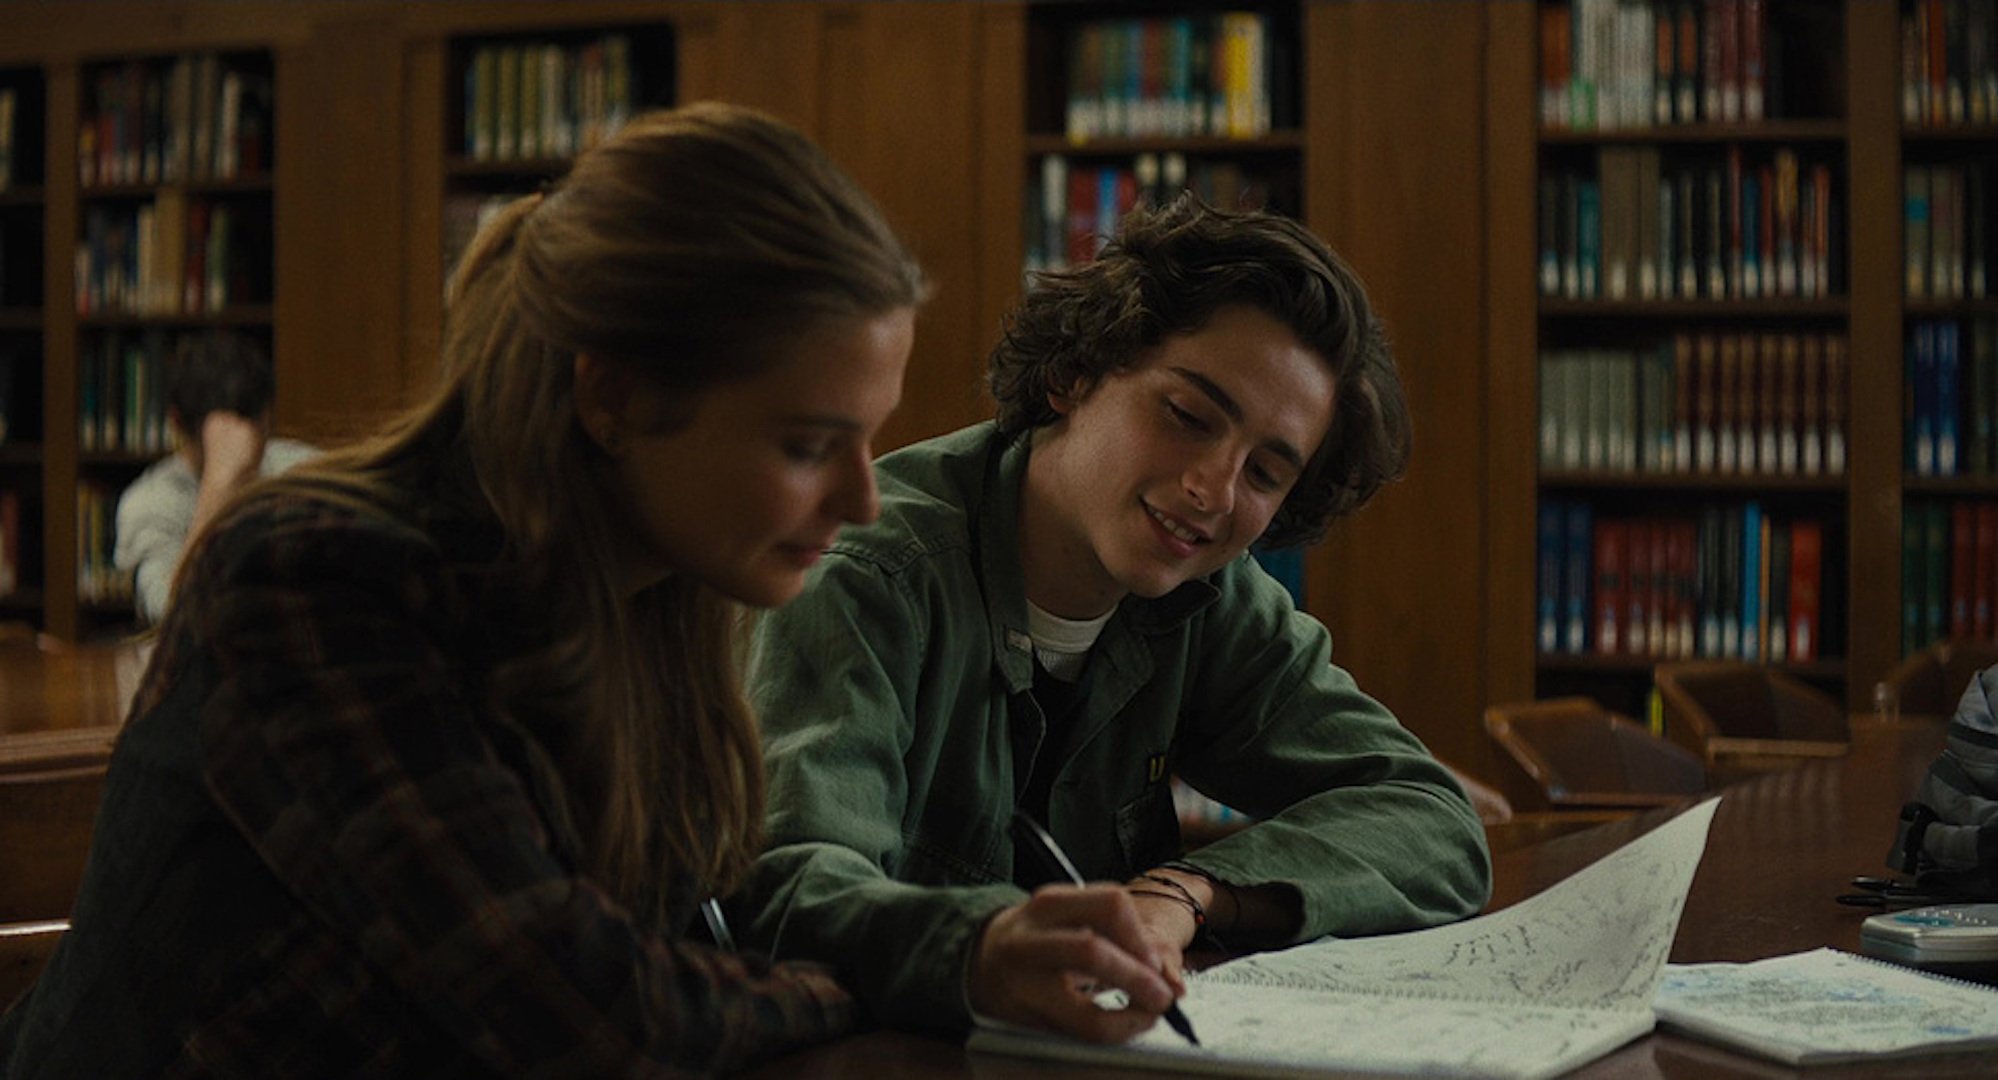 Nic (Timothée Chalamet) writing in a girl's journal in a library in 'Beautiful Boy'